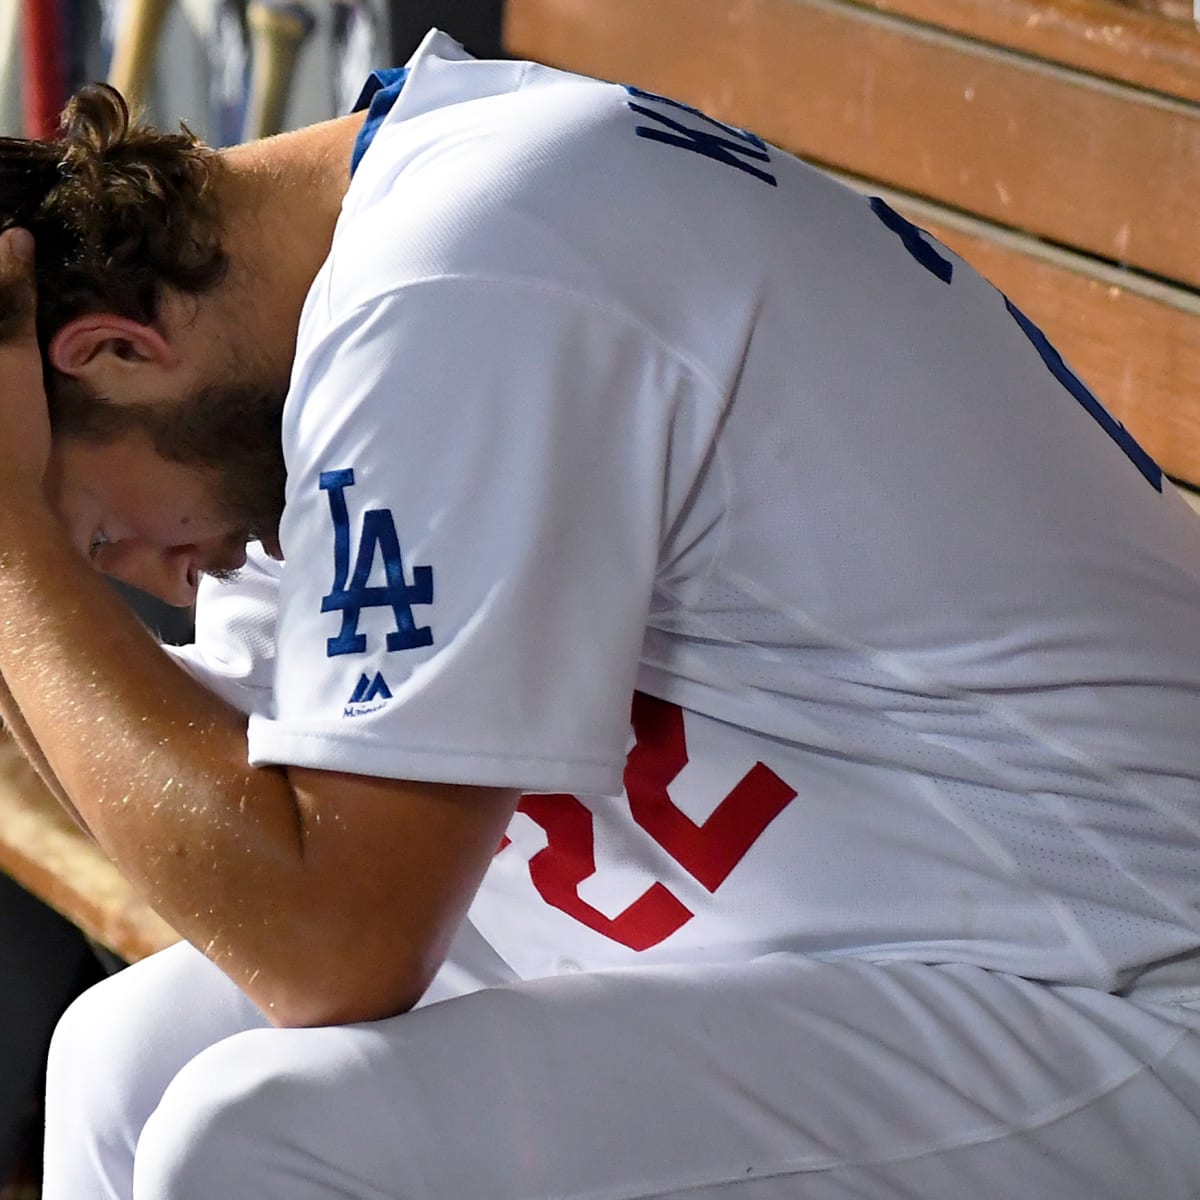 Clayton Kershaw blames himself for Dodgers loss to Nationals in